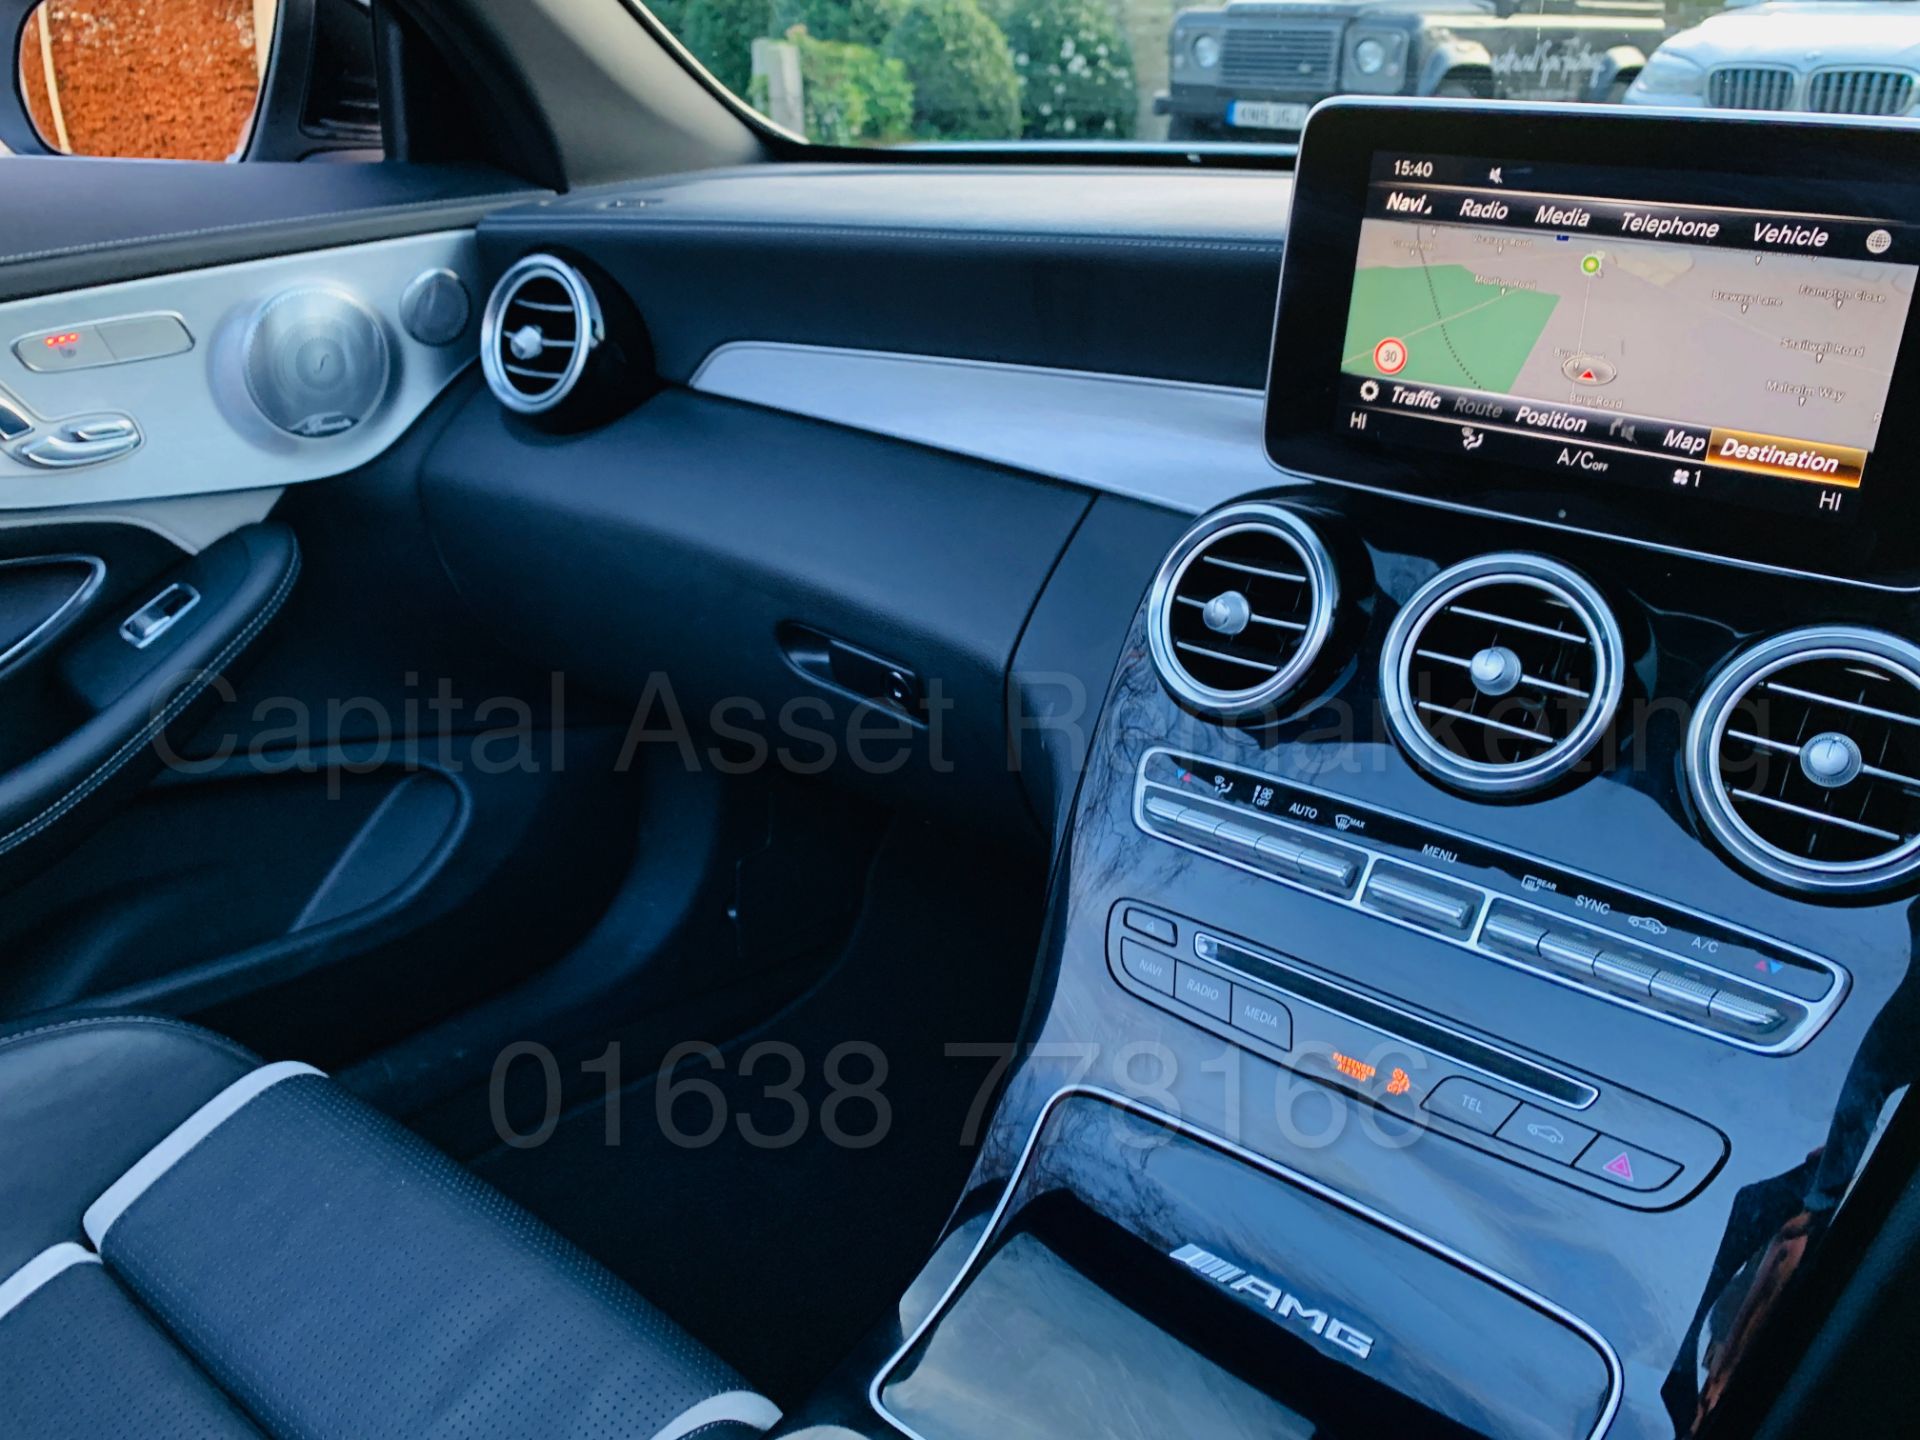 (On Sale) MERCEDES-BENZ AMG C63-S *CABRIOLET* (67 REG) '4.0 BI-TURBO -510 BHP - AUTO' *FULLY LOADED* - Image 66 of 79